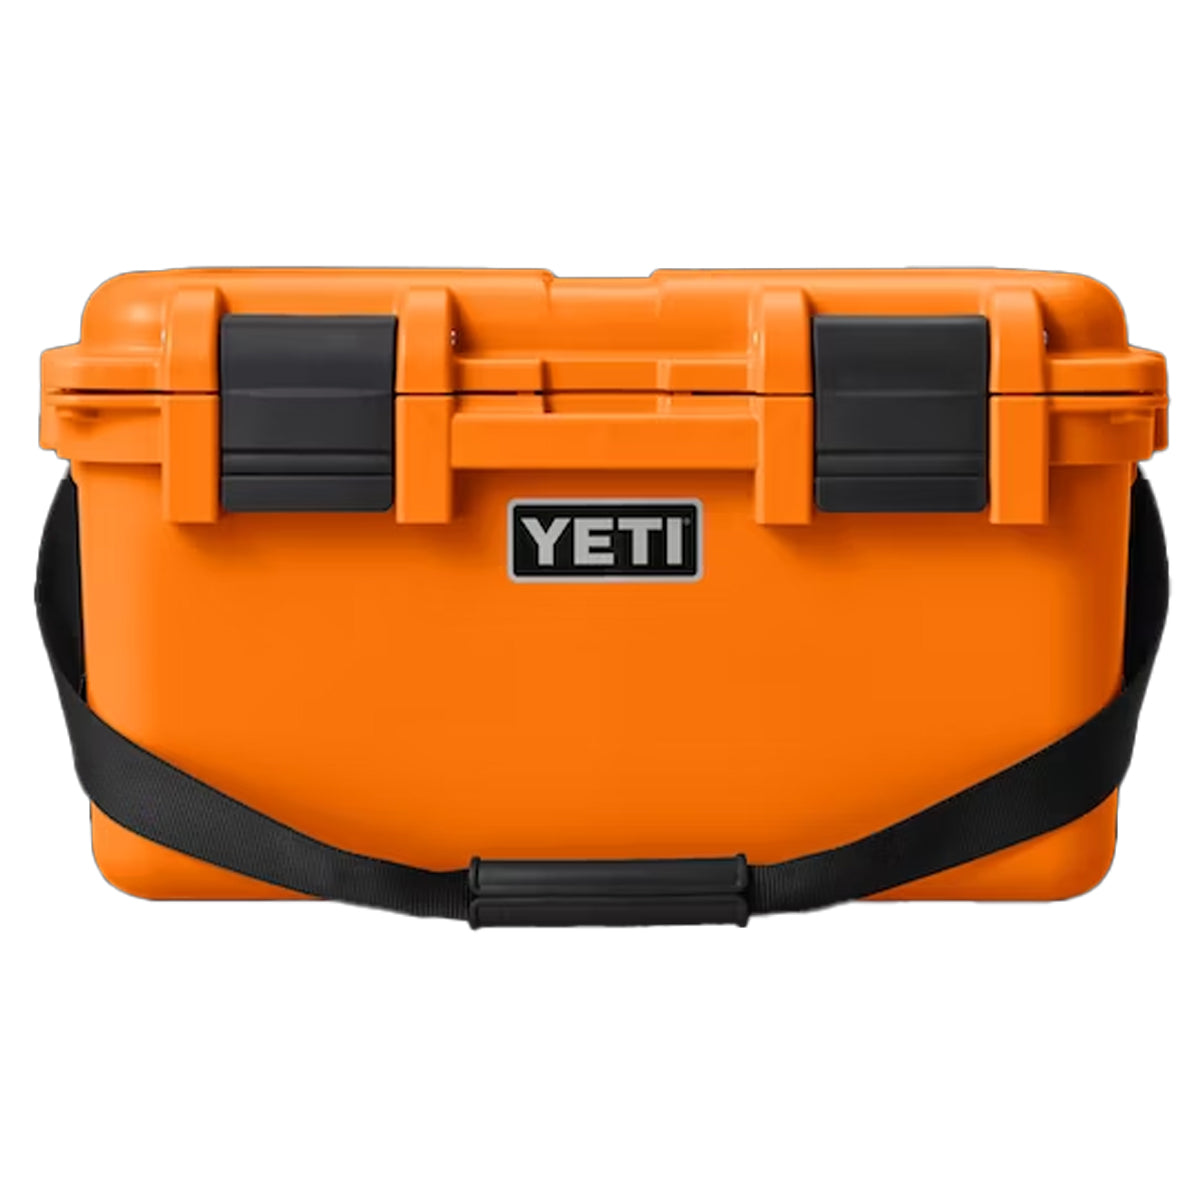 Shop for YETI LoadOut GoBox 30 2.0 | GOHUNT